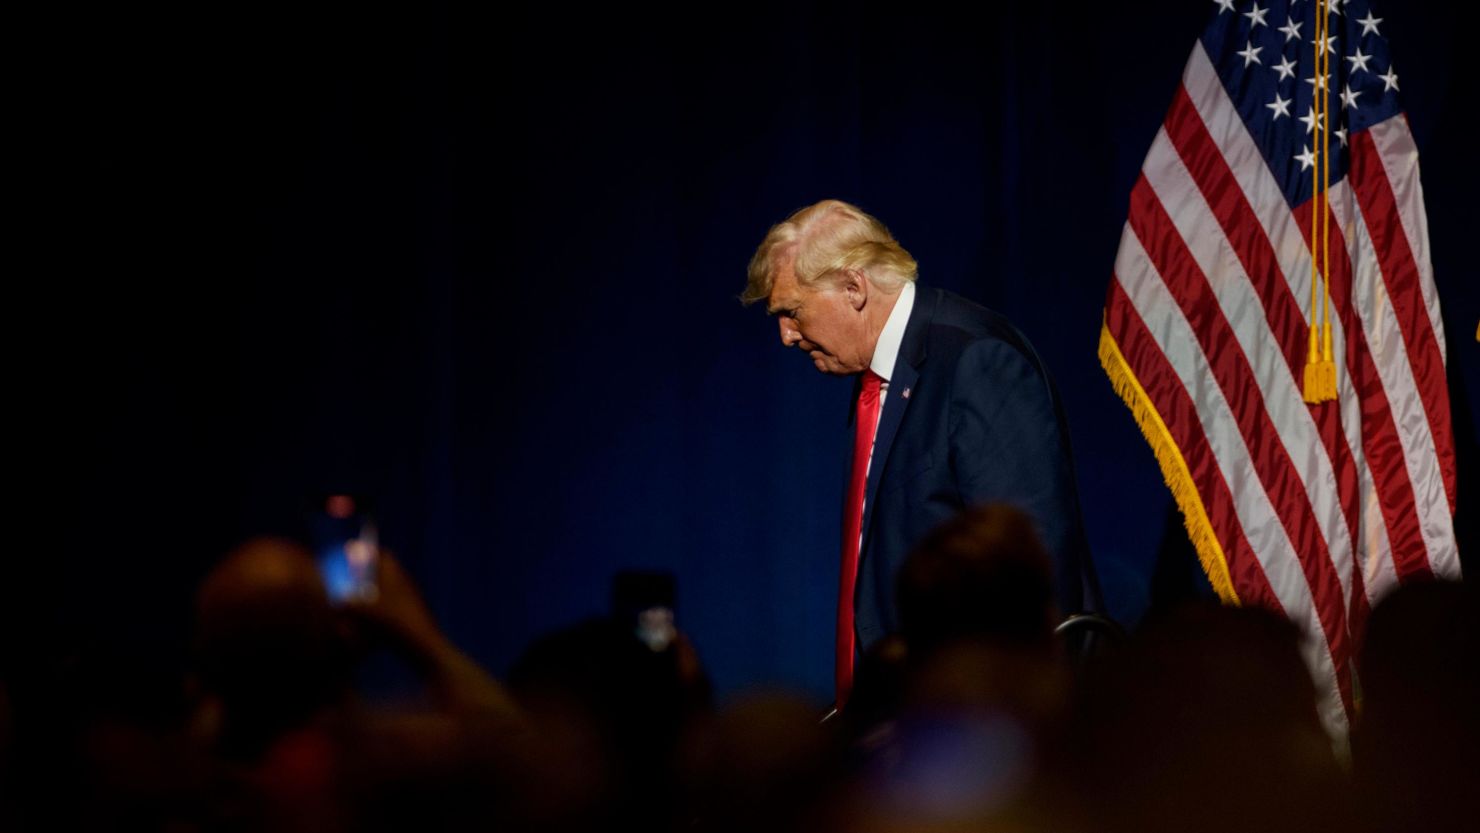 Former US President Donald Trump exits the North Carolina GOP state convention on June 5, 2021 in Greenville, North Carolina.